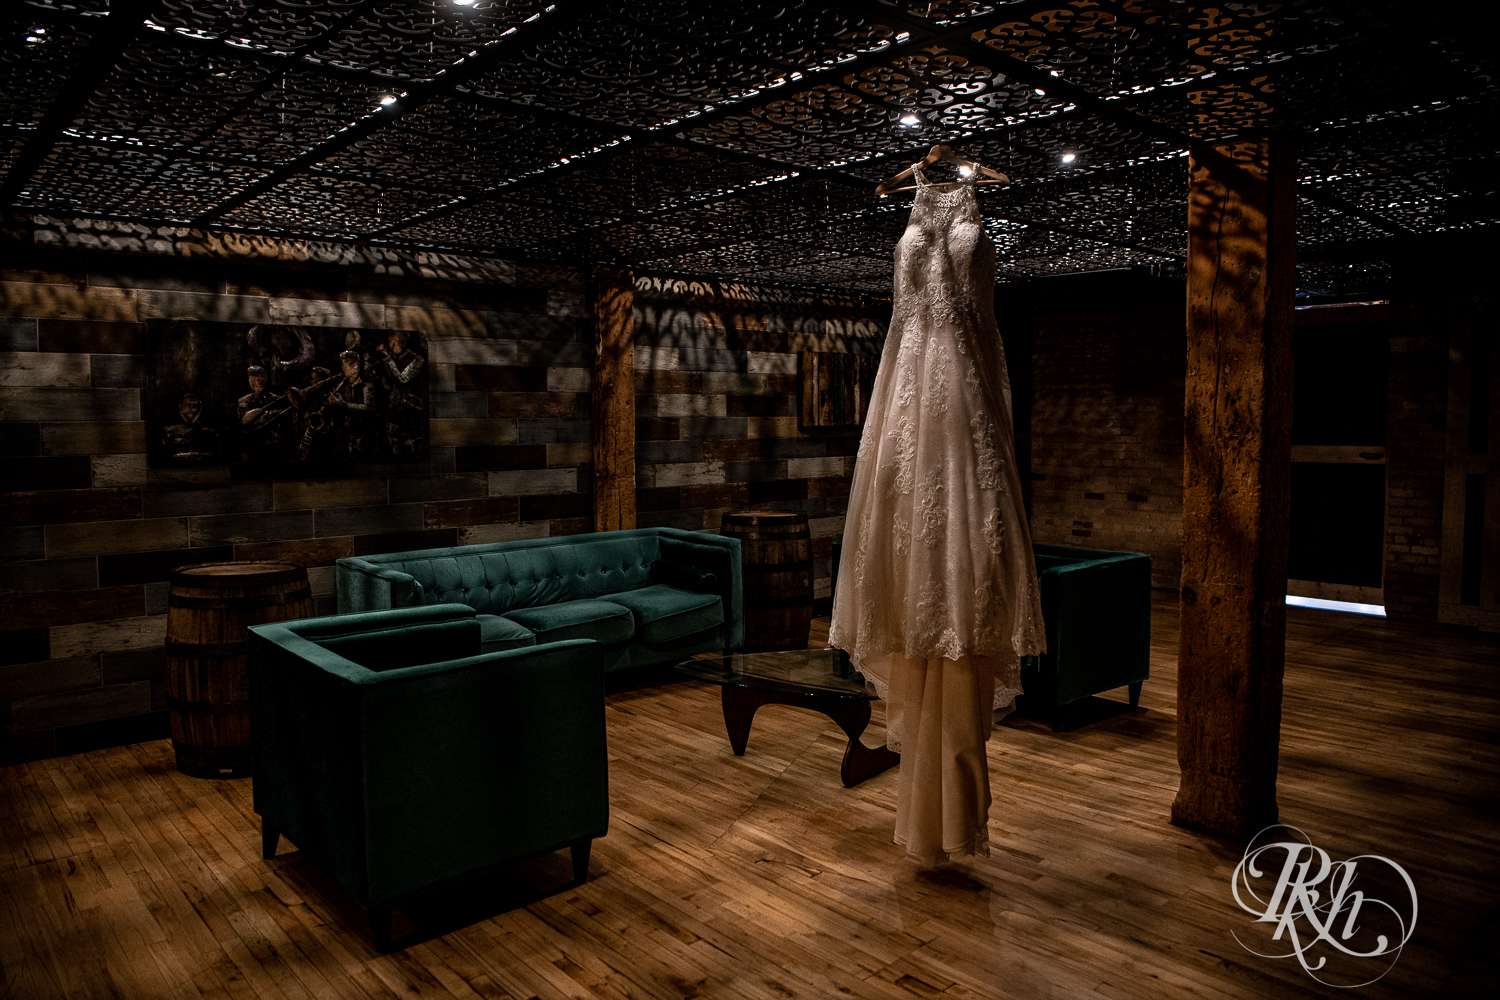 Wedding dress hangs from ceiling at Minneapolis Event Center in Minneapolis, Minnesota.